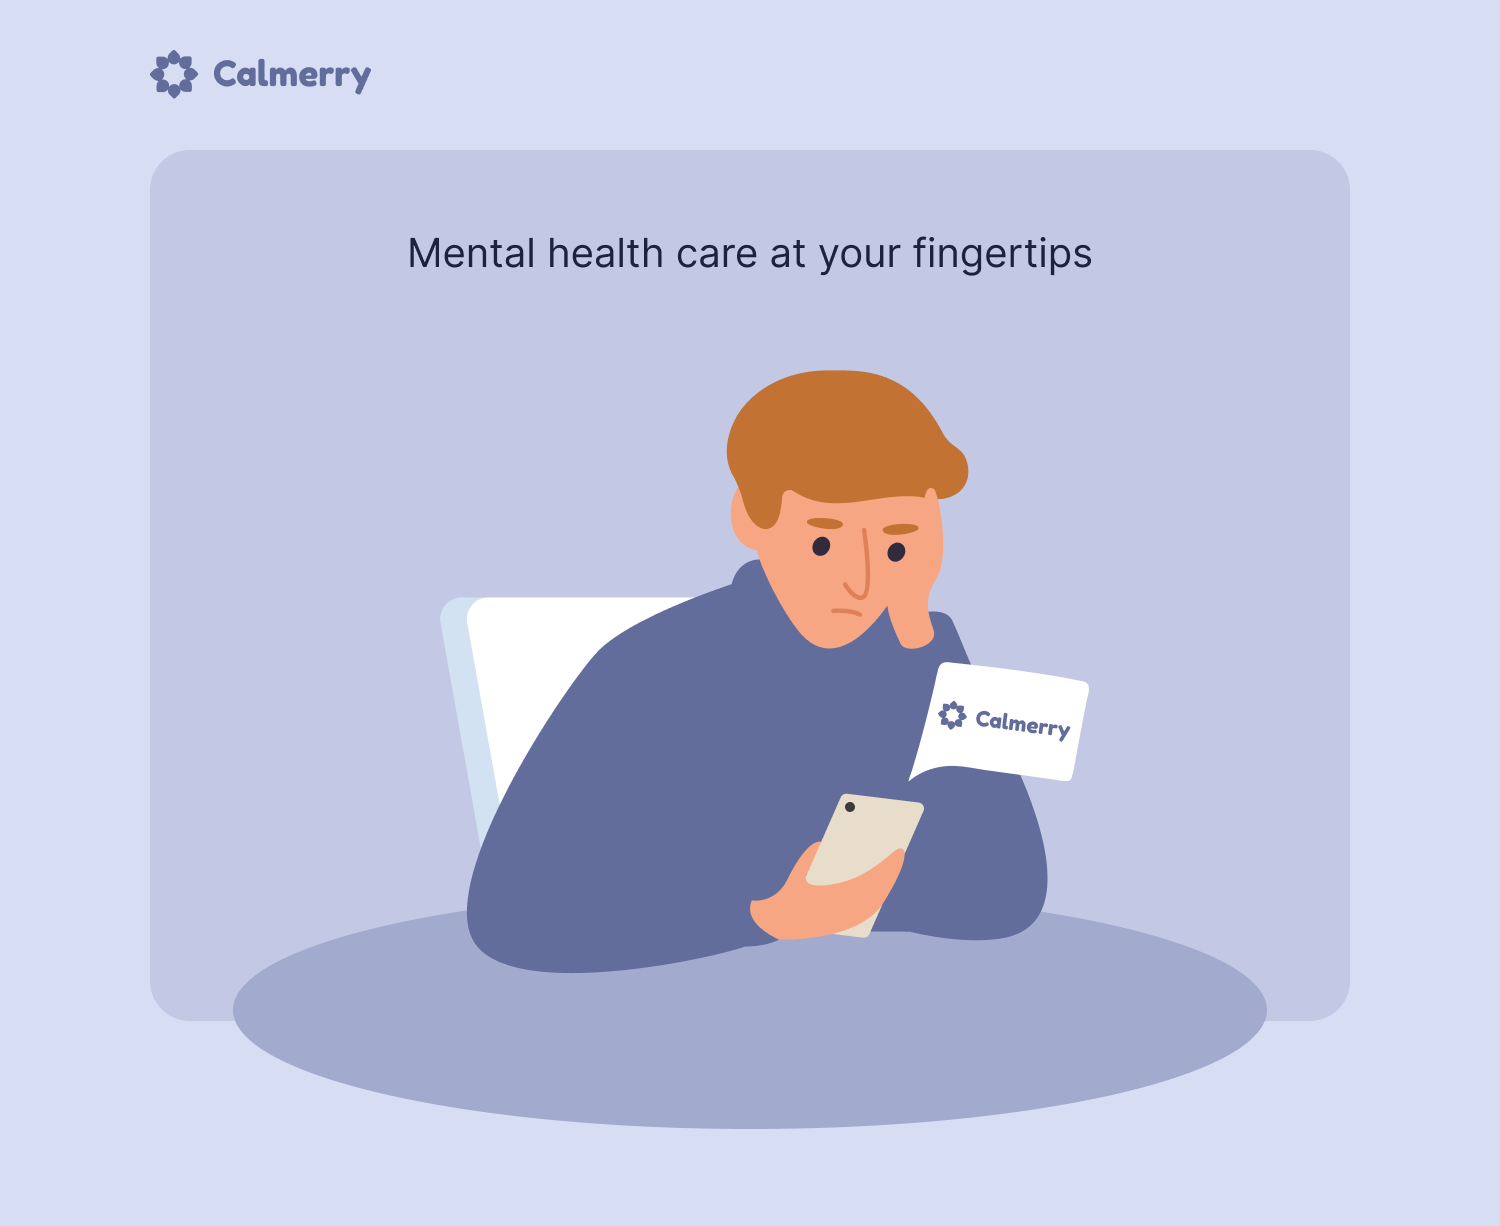 Mental health care at your fingertips